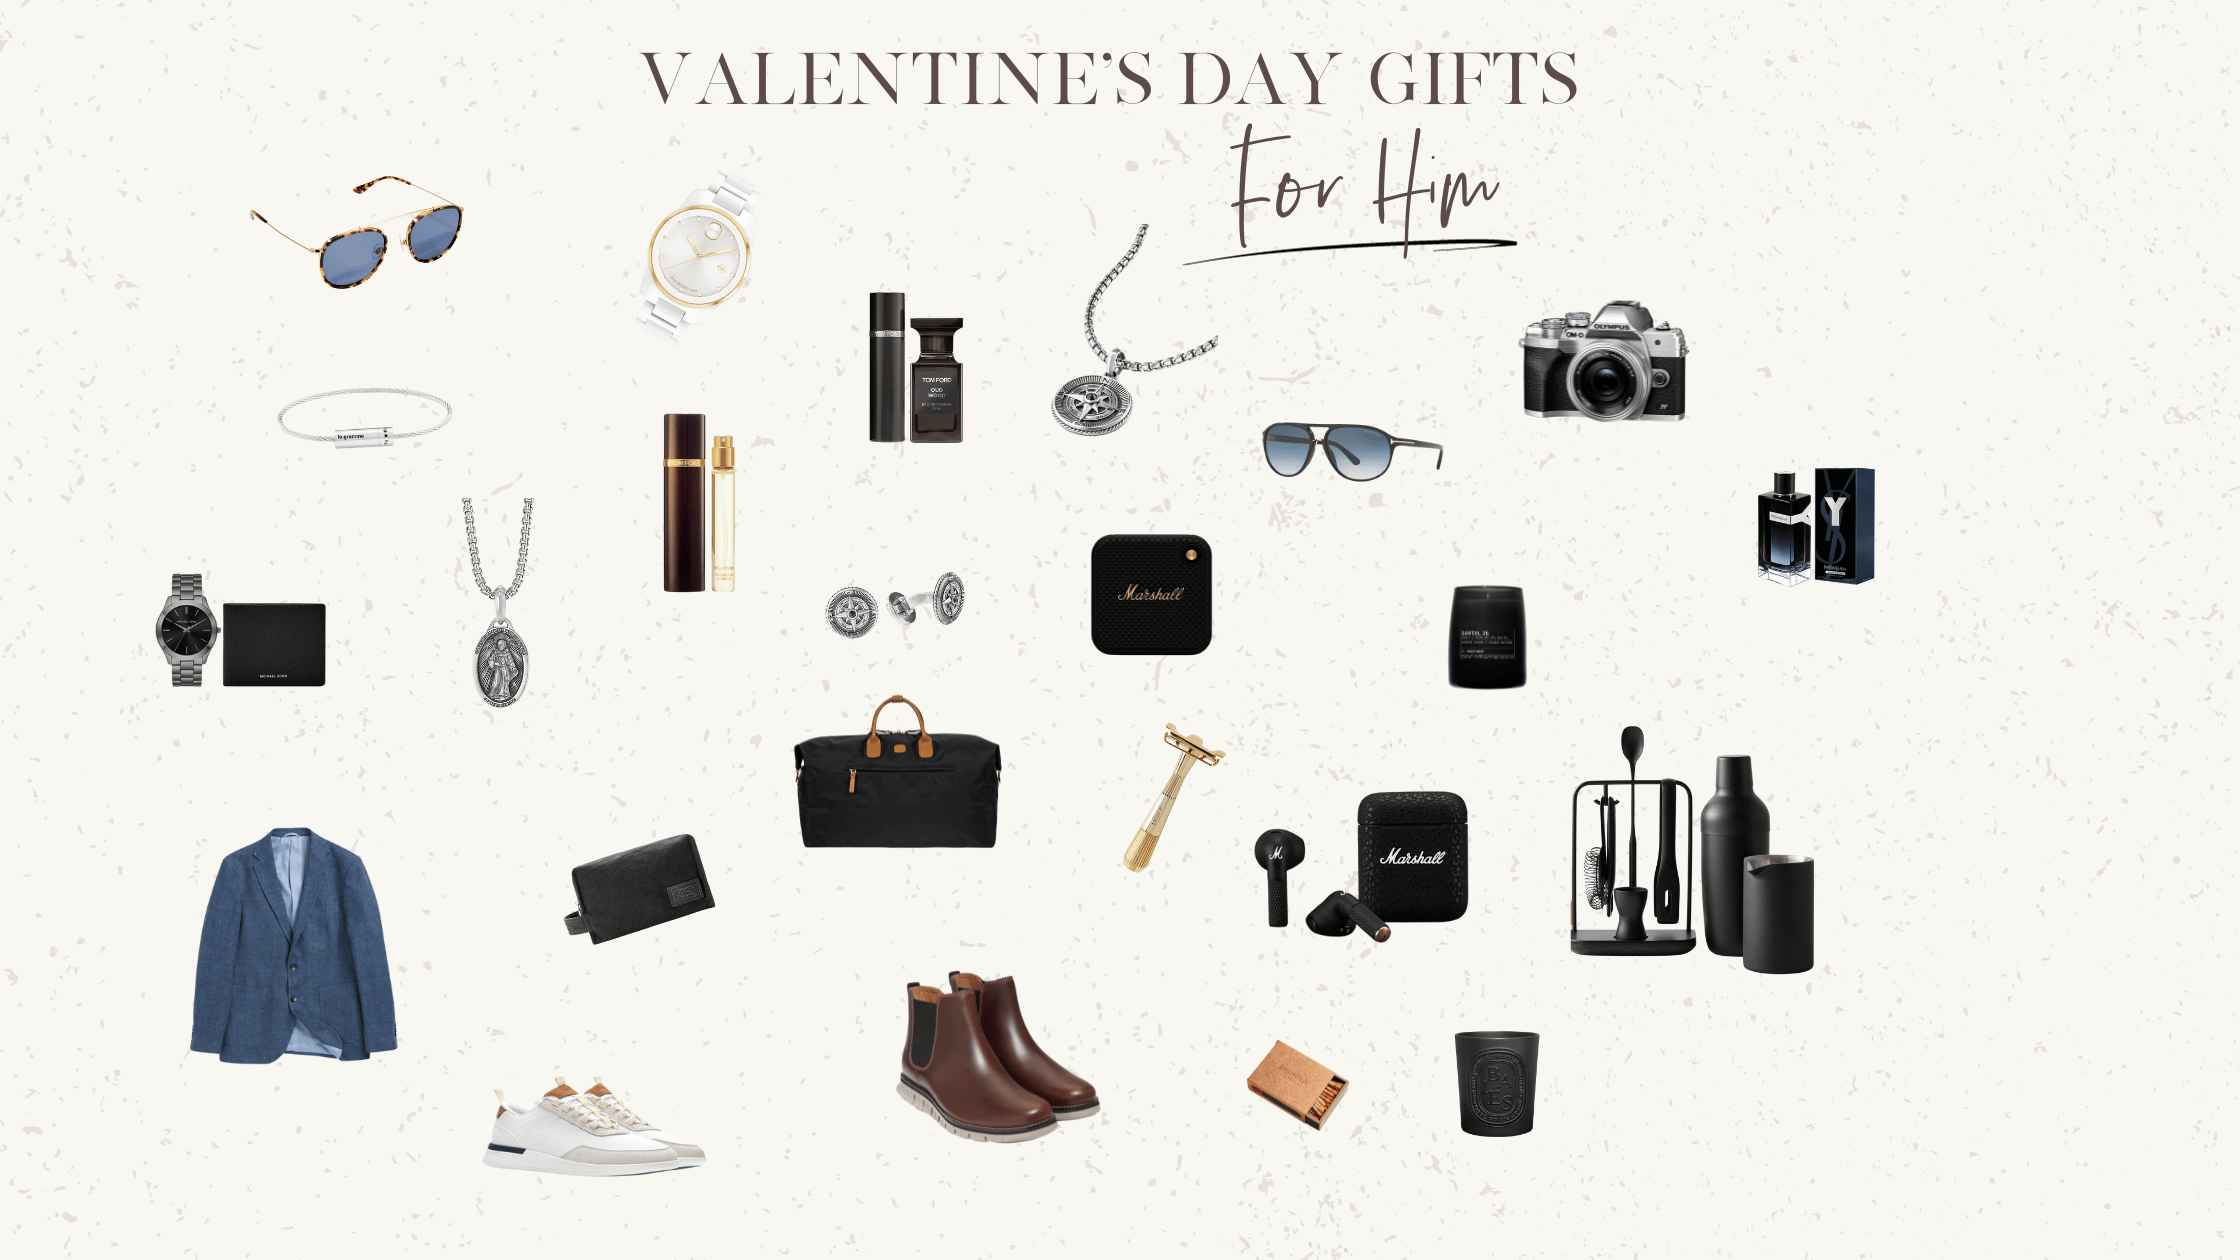 Luxury Valentine's Day Gifts for Him